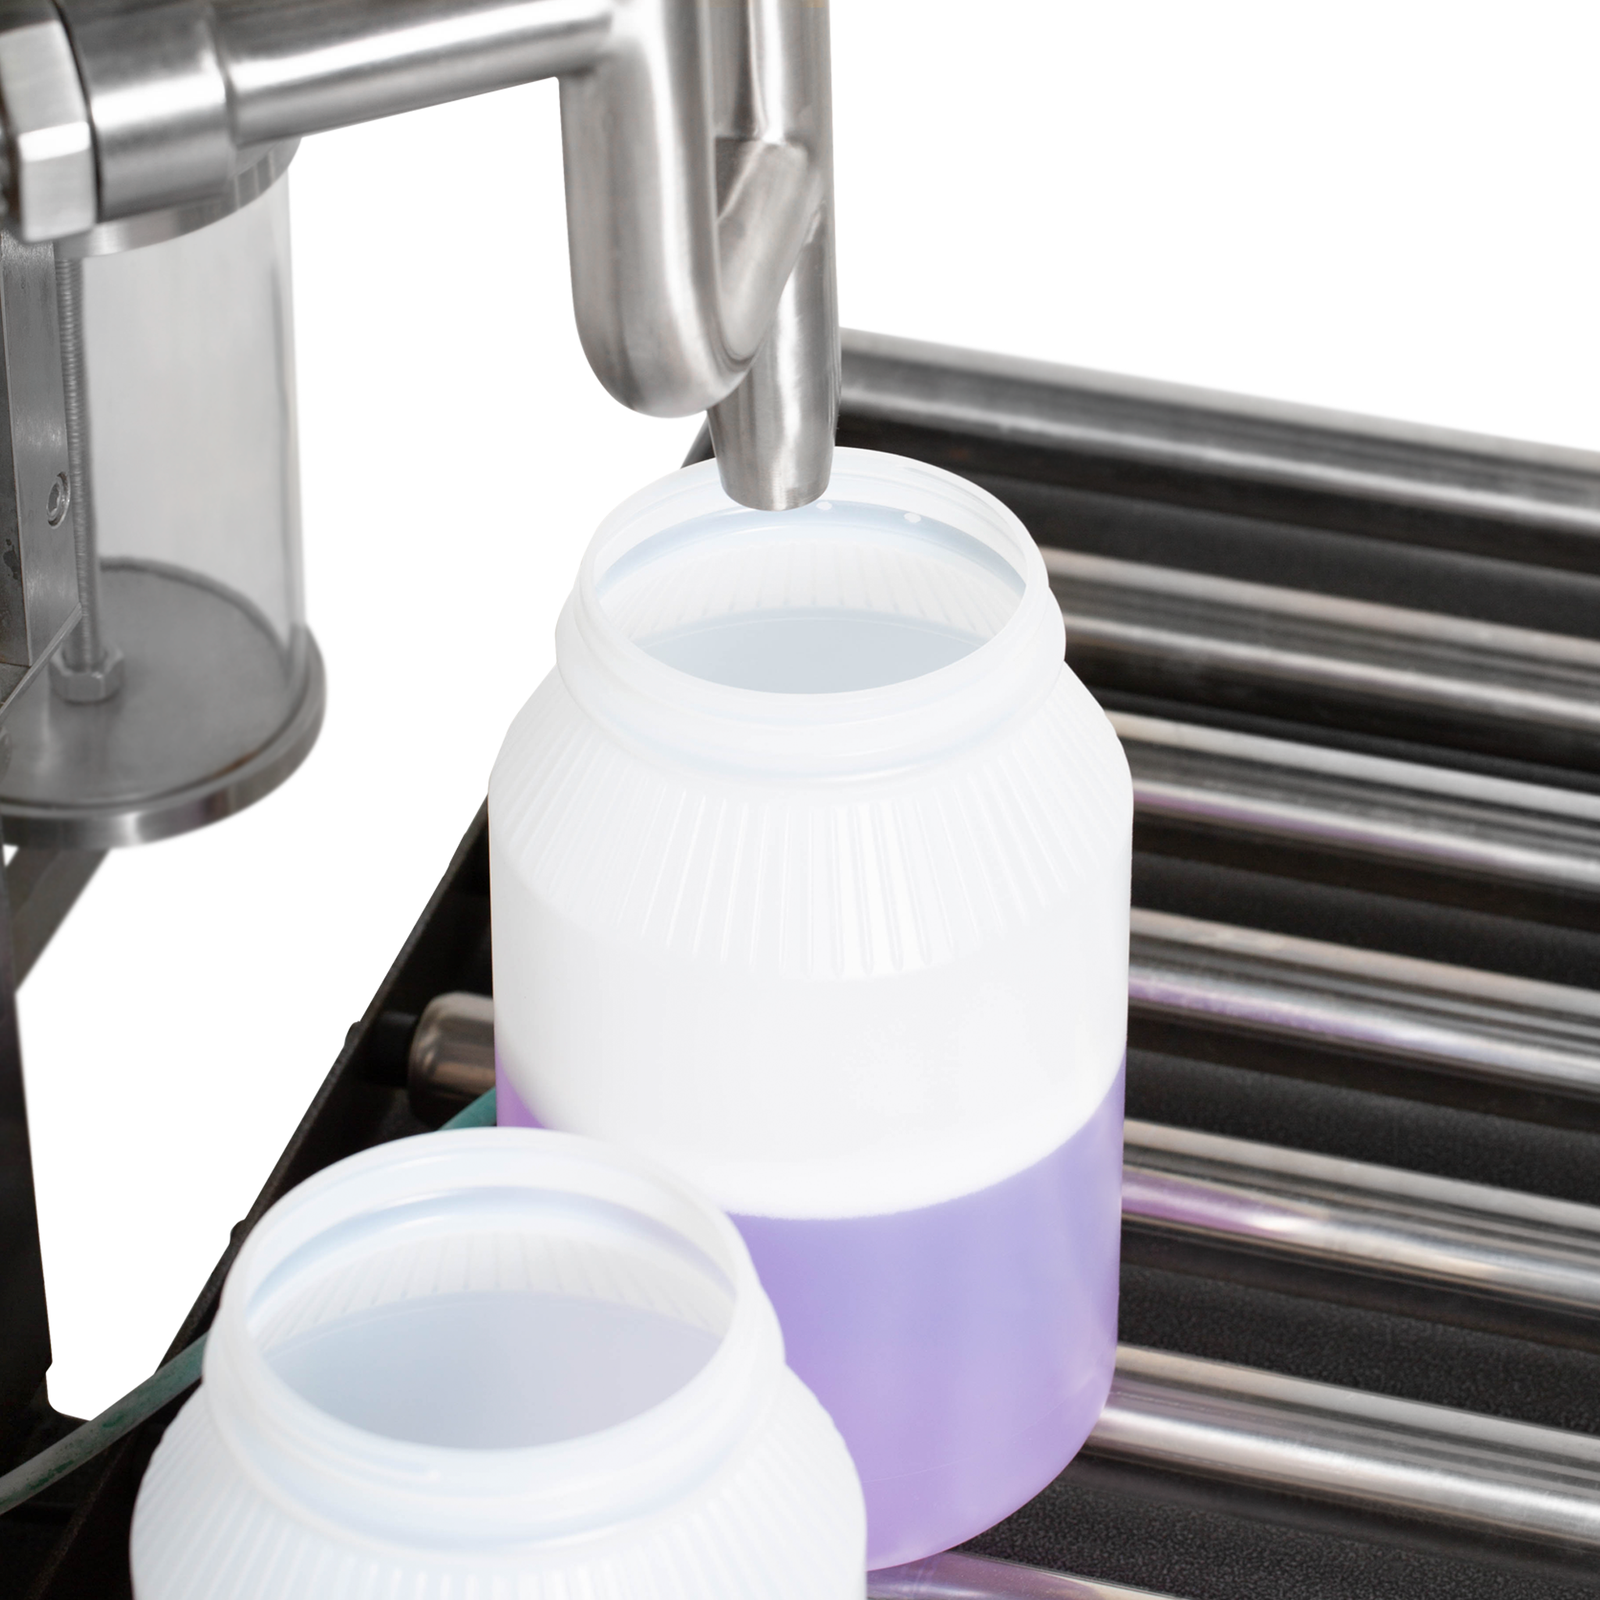 Closeup image shows two extra large containers positioned on top of the roller conveyors. One of them is being filled with a purple solution by the net weight liquid filler